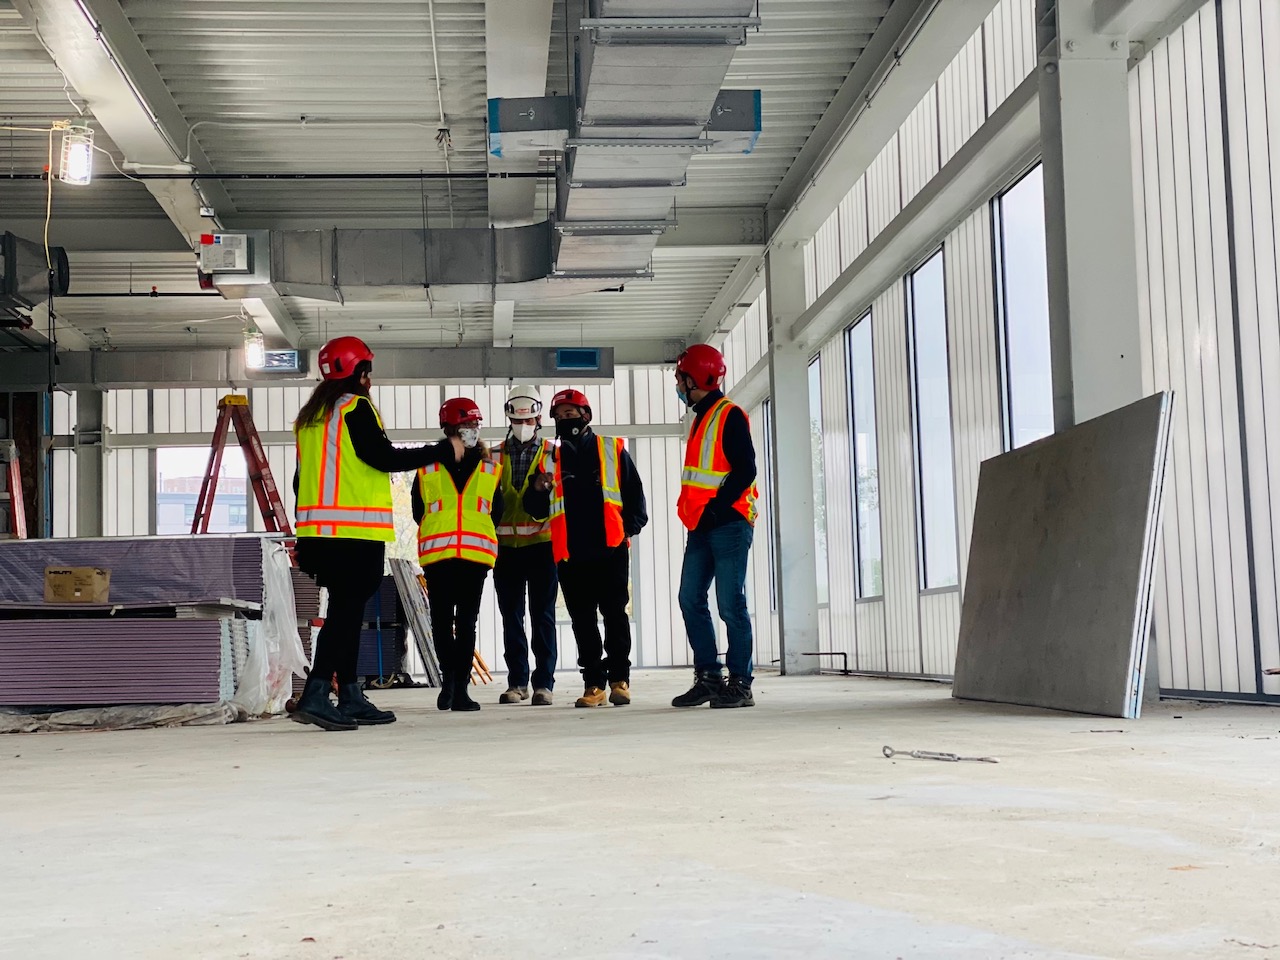 After COVID-19 related delays, construction resumed on the North East Bronx YMCA, now slated to open on April 2021. Speaker Carl Heastie went to see the progress of the construction.